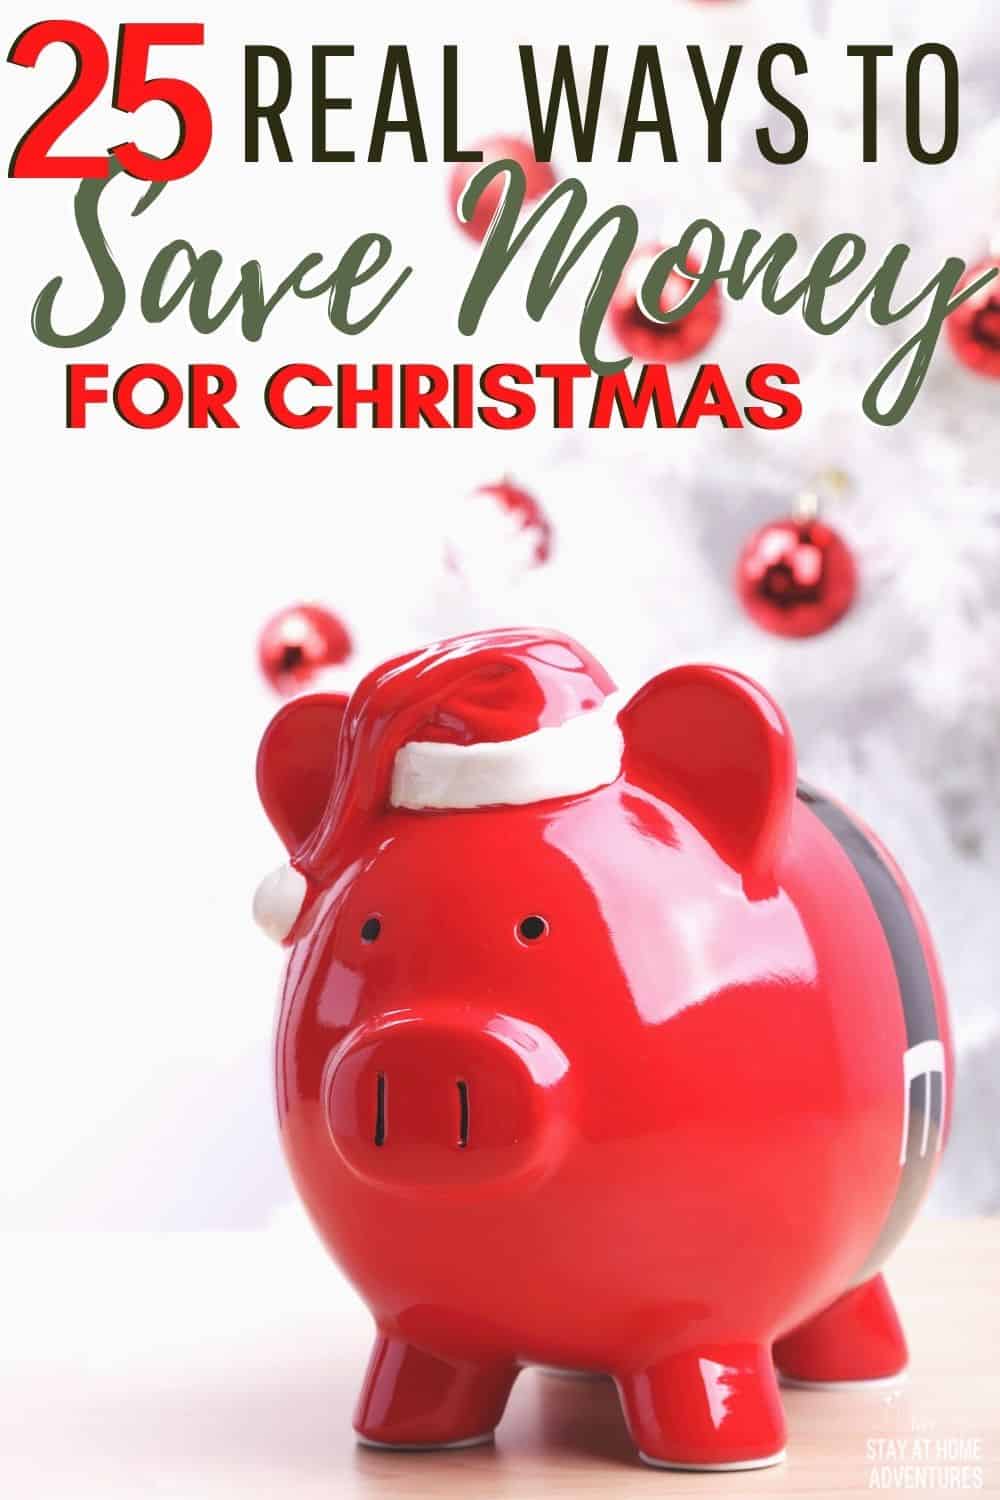 2020 is a year to remember! This holiday season makes it less stressful with these 25 REAL ways to save money for Christmas you can start doing right now. via @mystayathome